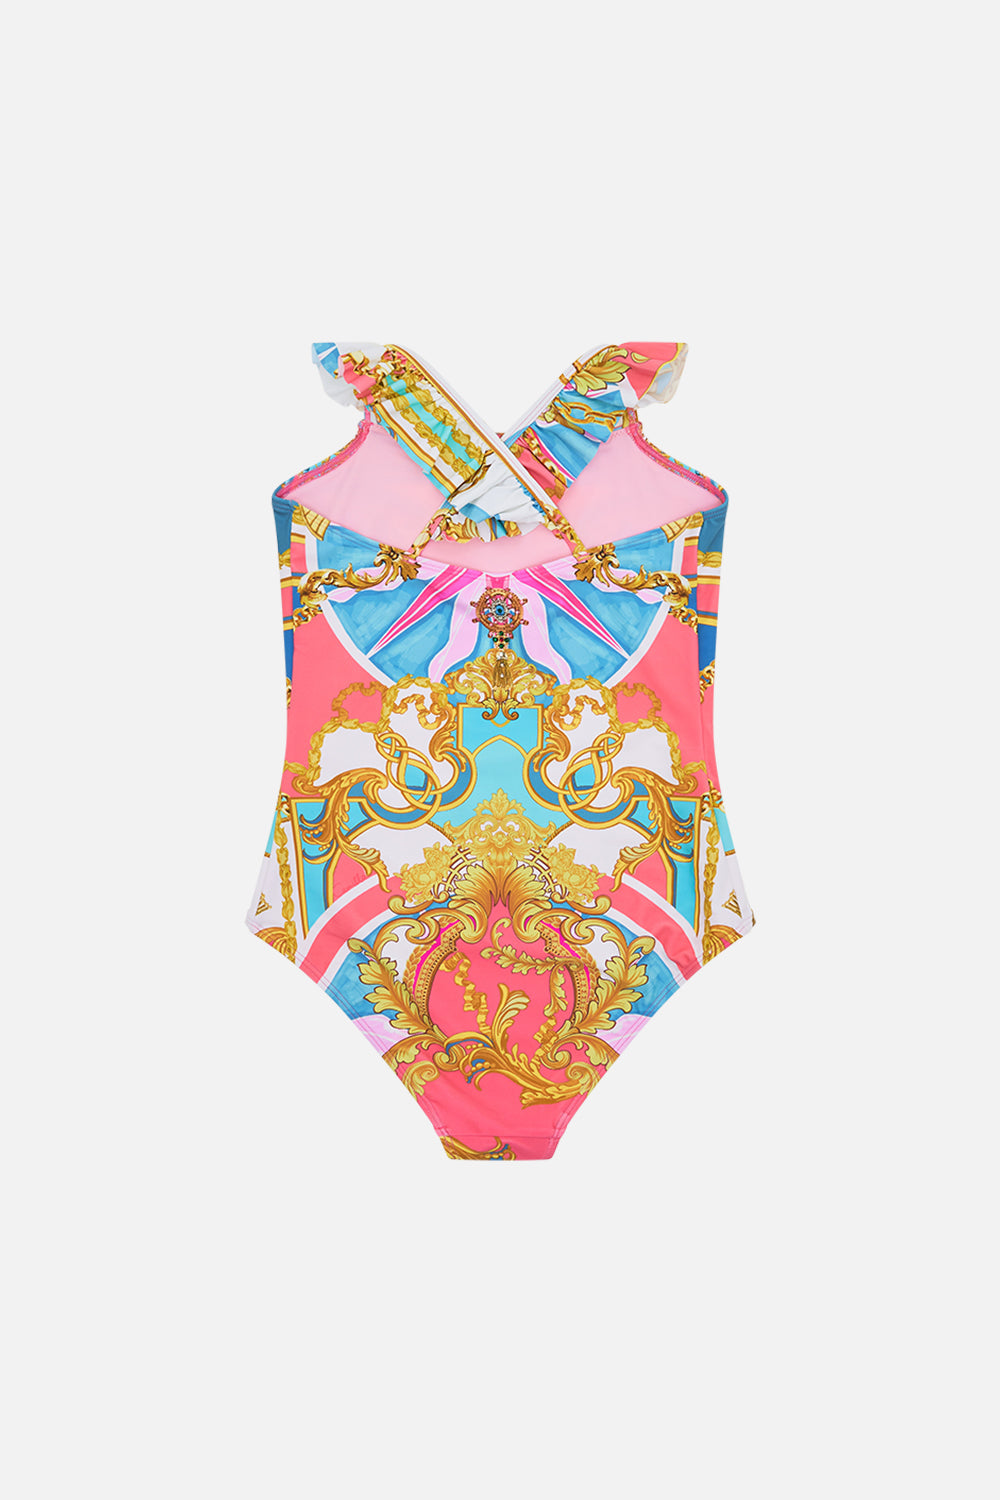 Product view of Milla By CAMILLA kids one piece swimsuit in Sail Away With Me Print 